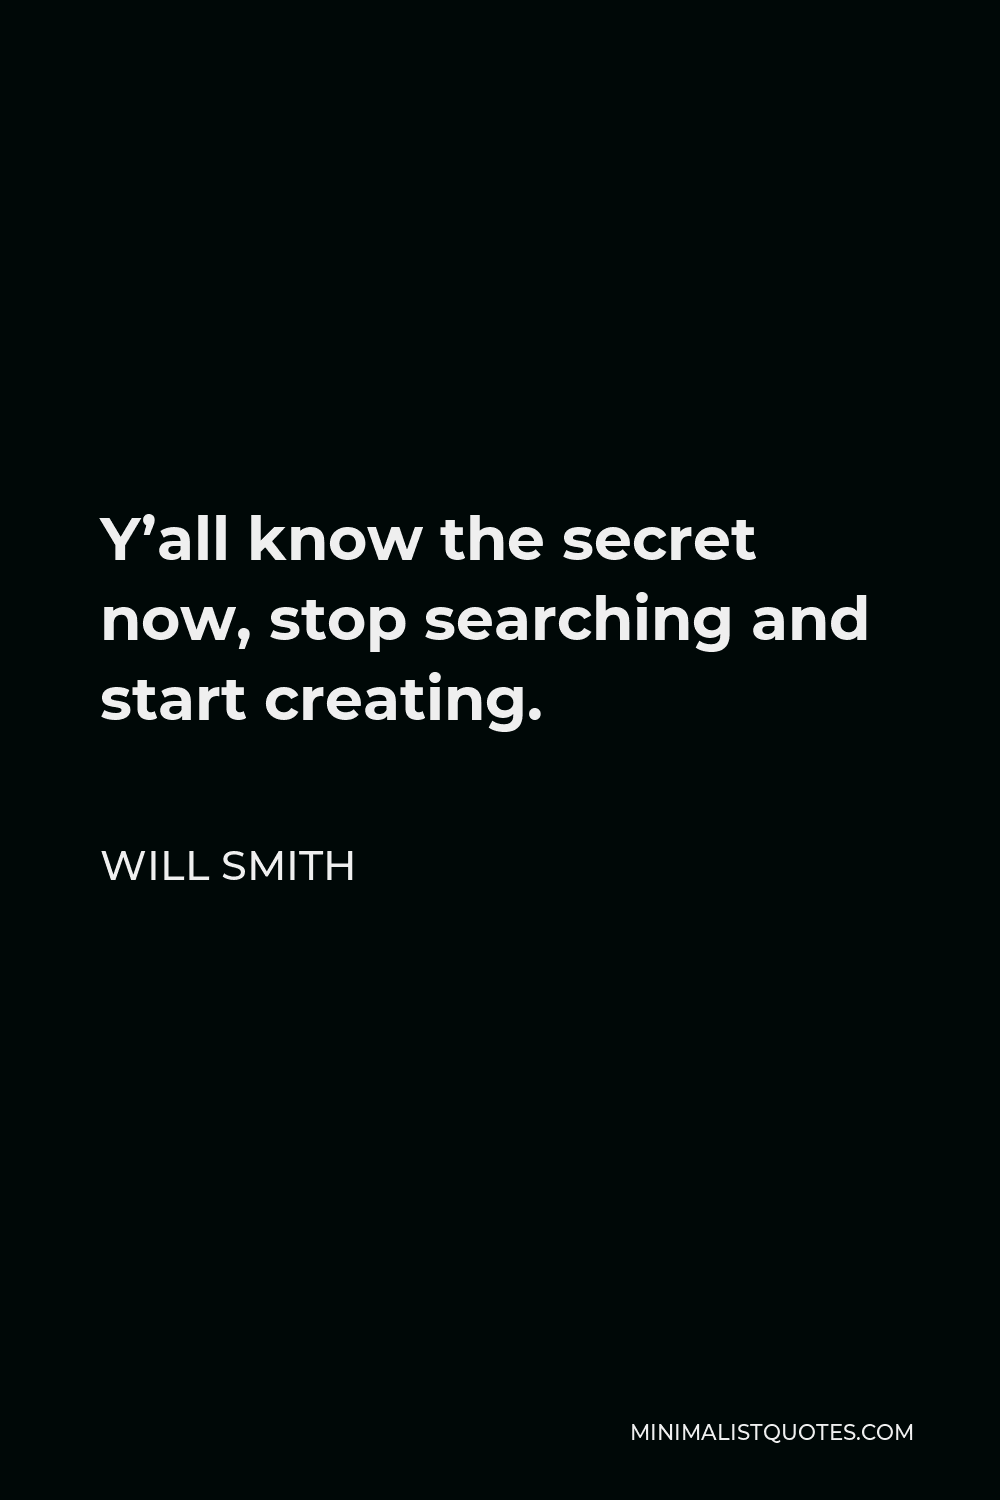 Will Smith Quote - Y’all know the secret now, stop searching and start creating.